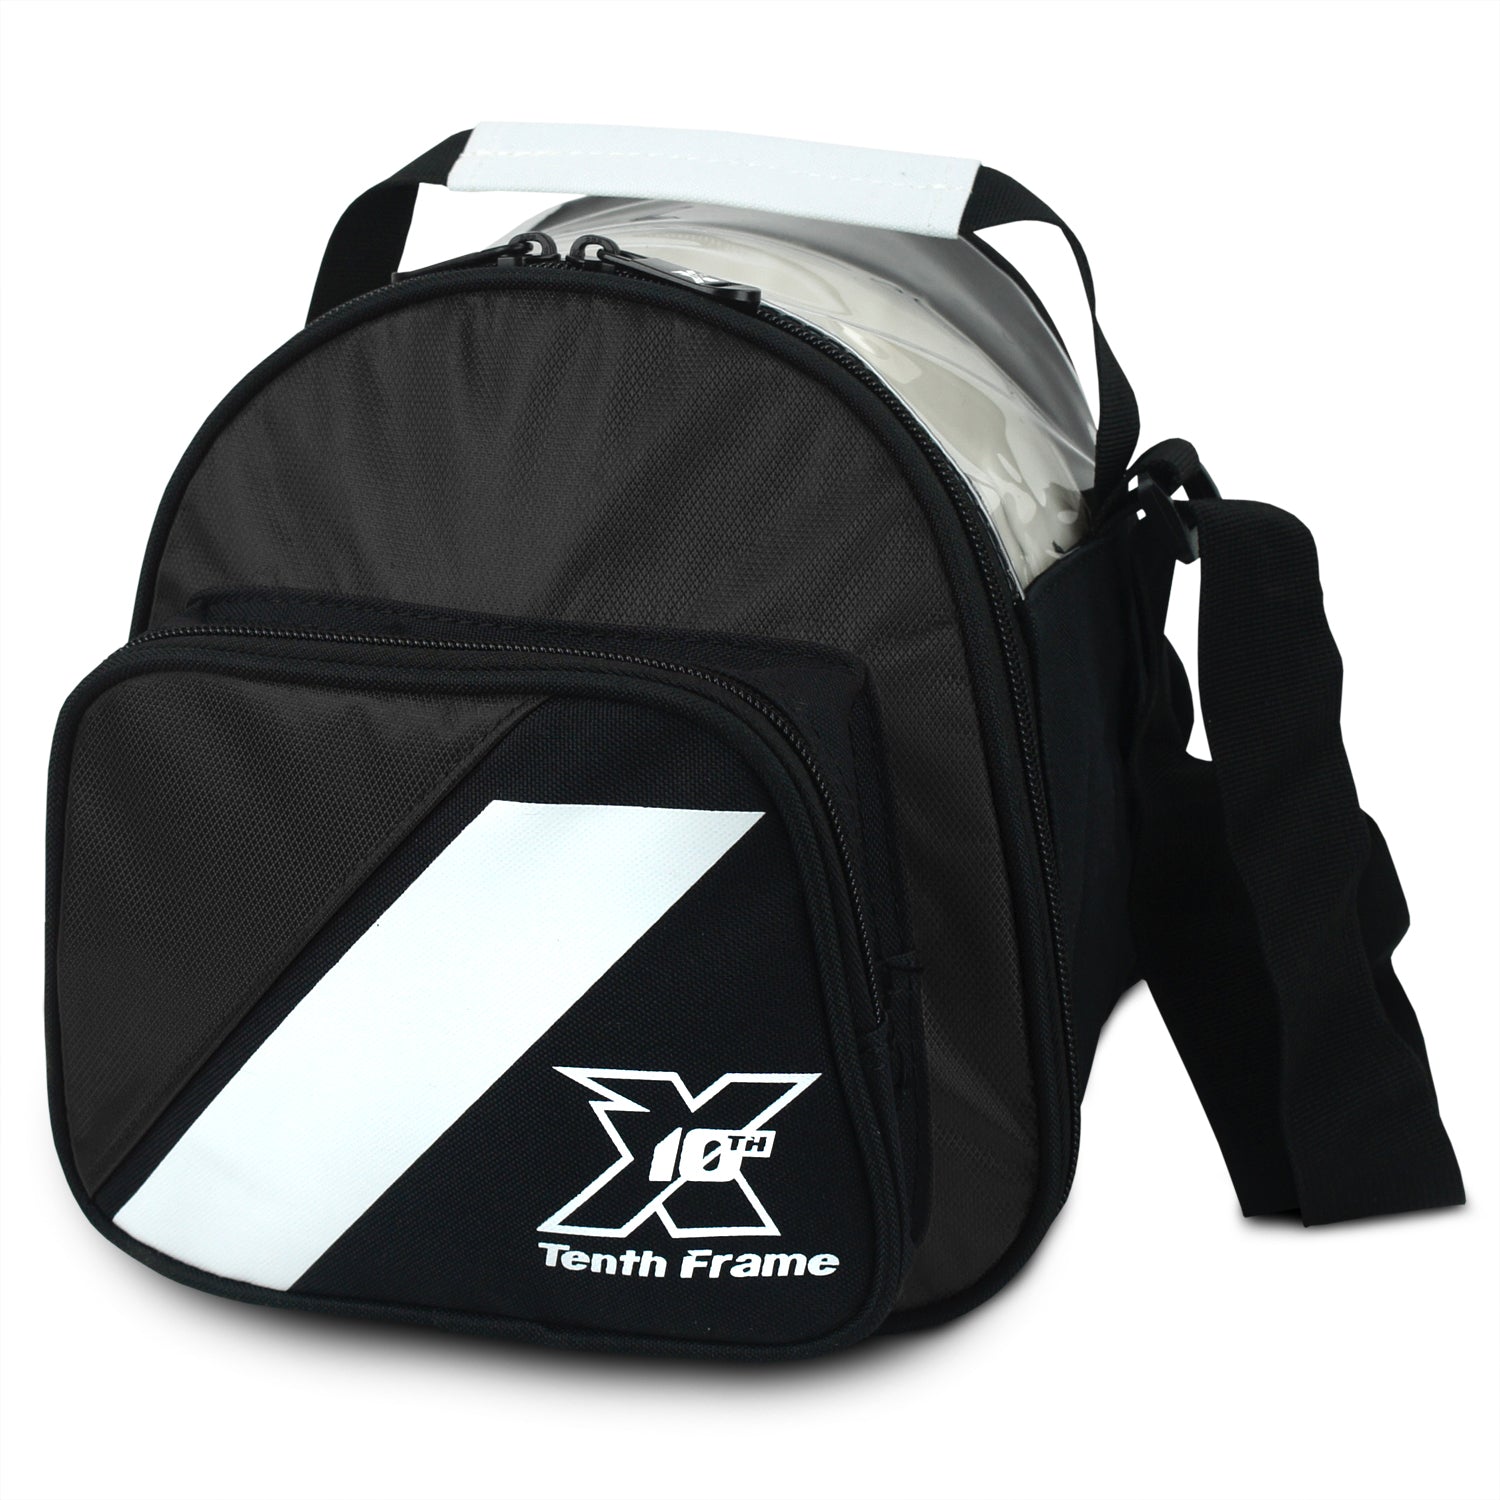 Tenth Frame Deluxe Add-On Bag - 1 Ball Add-On Bowling Bag (Black)